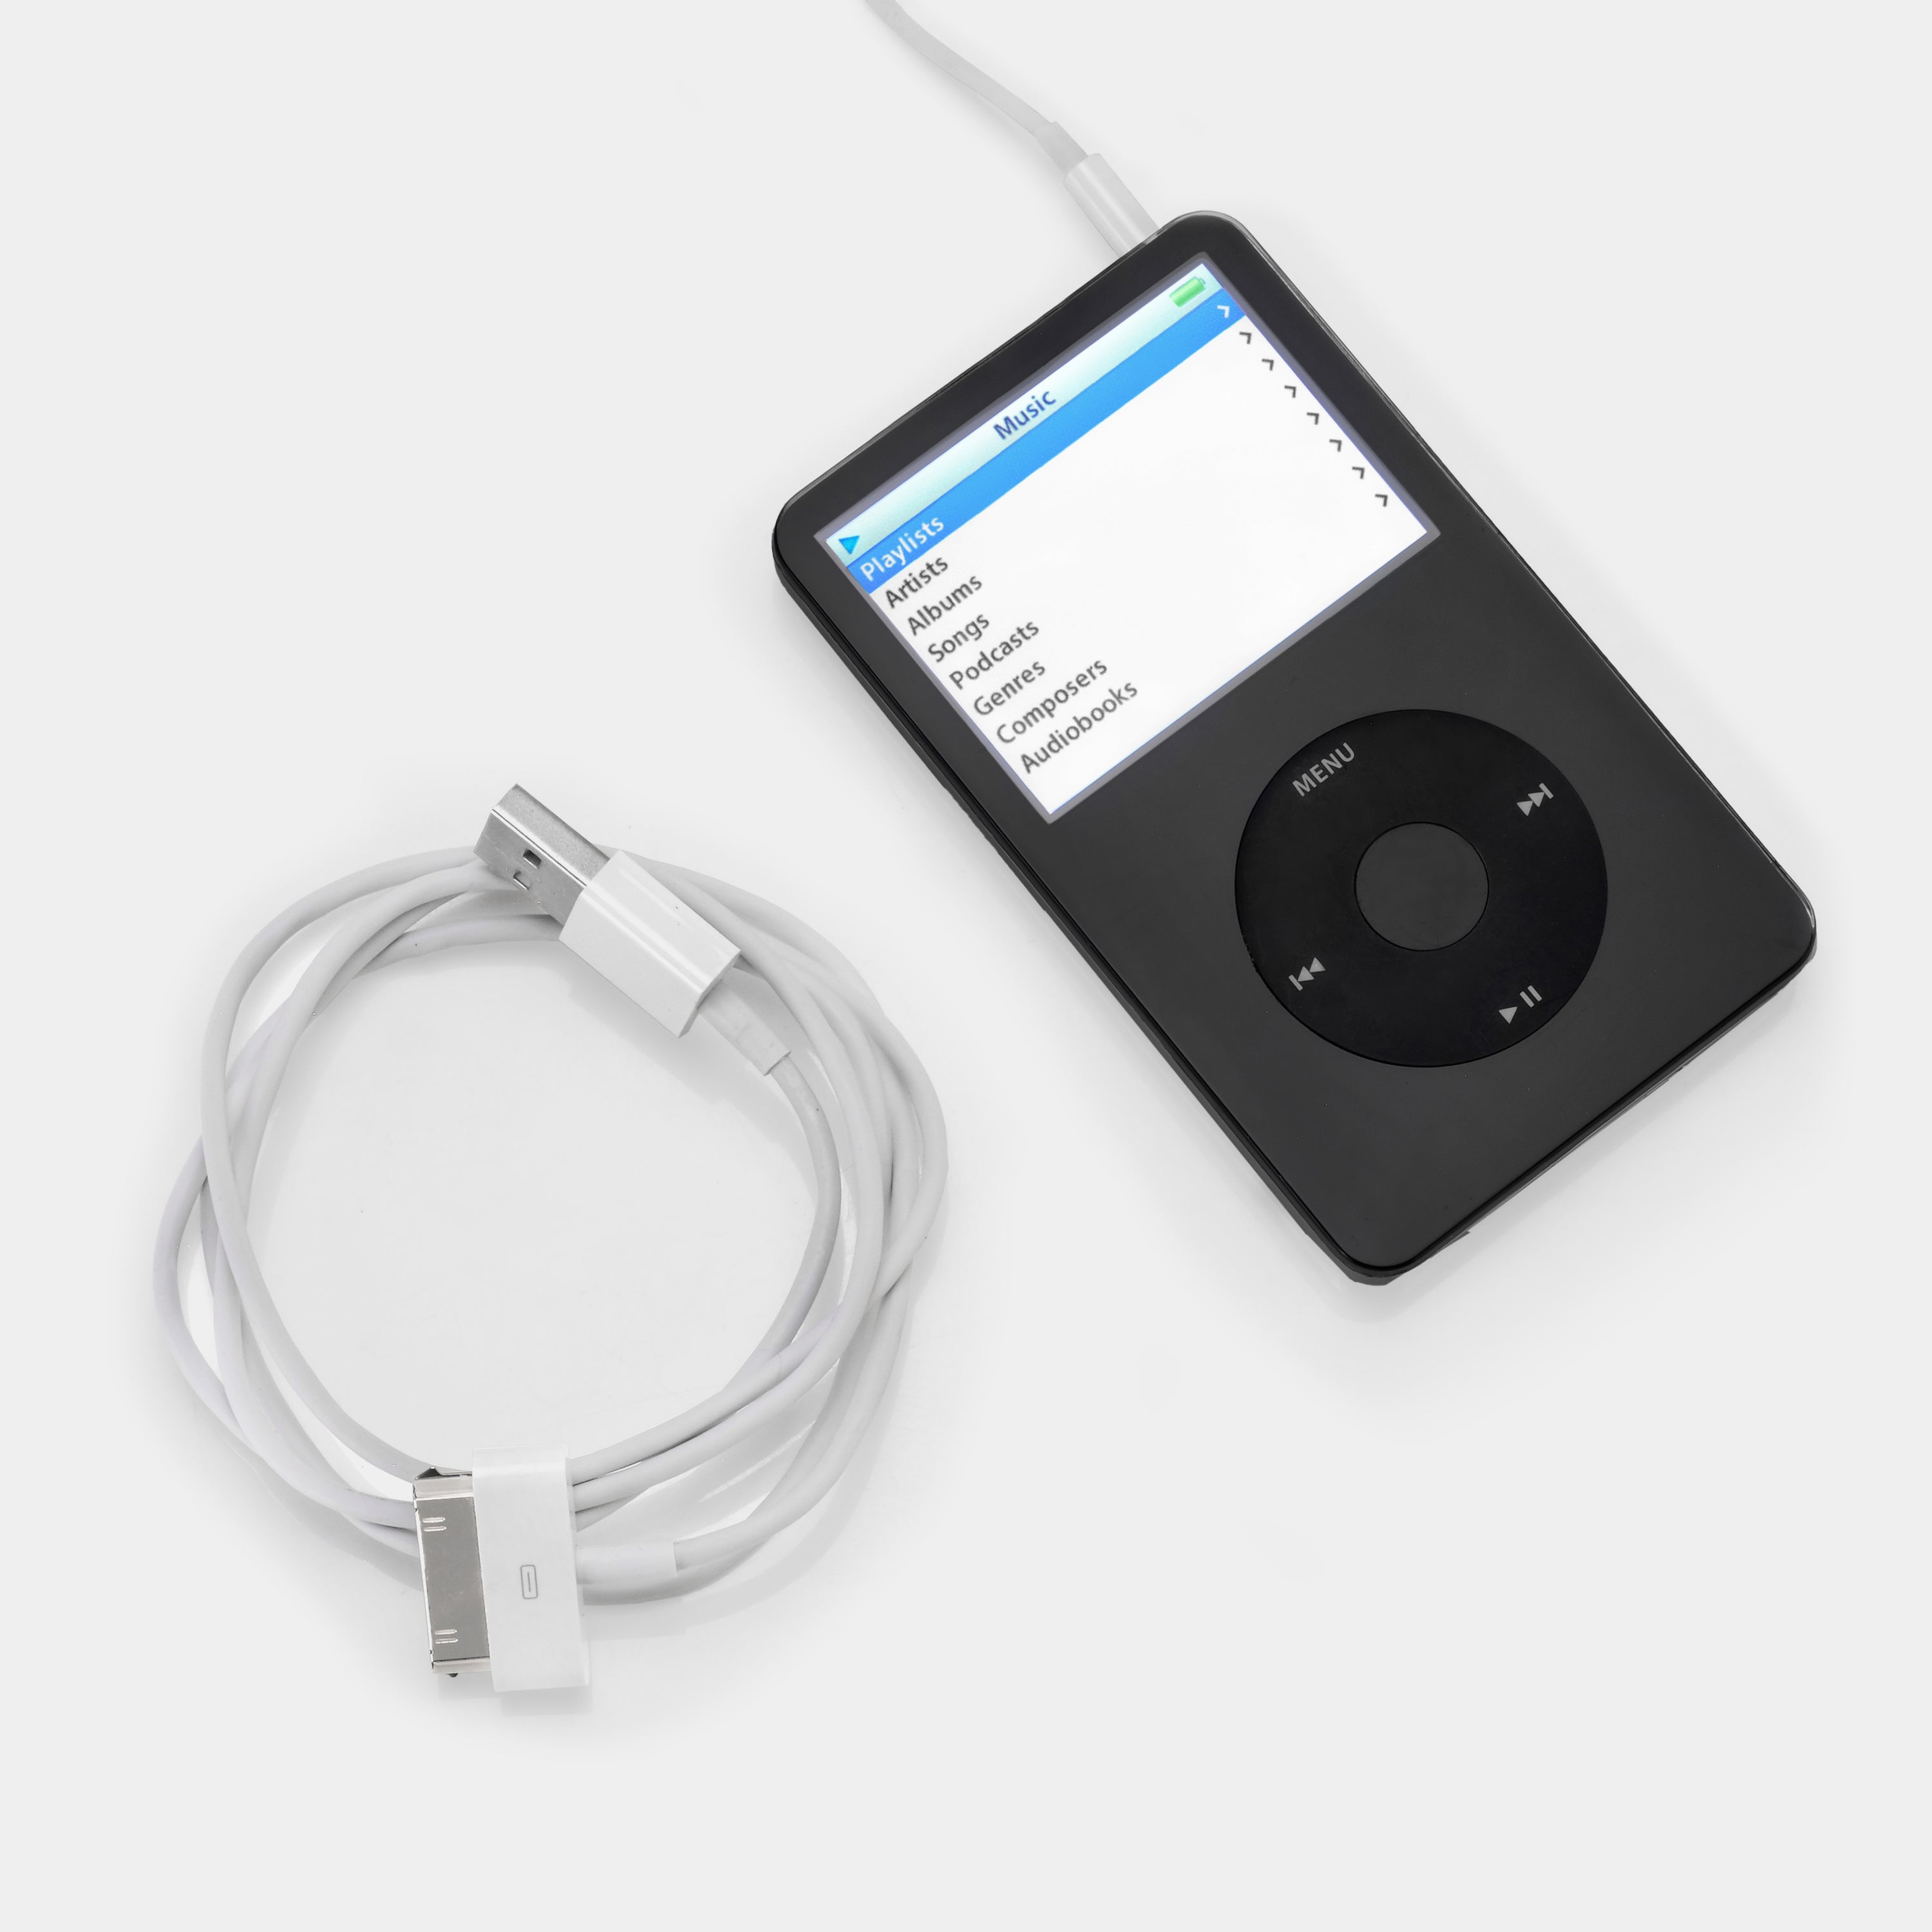 ipod 5th generation black and silver